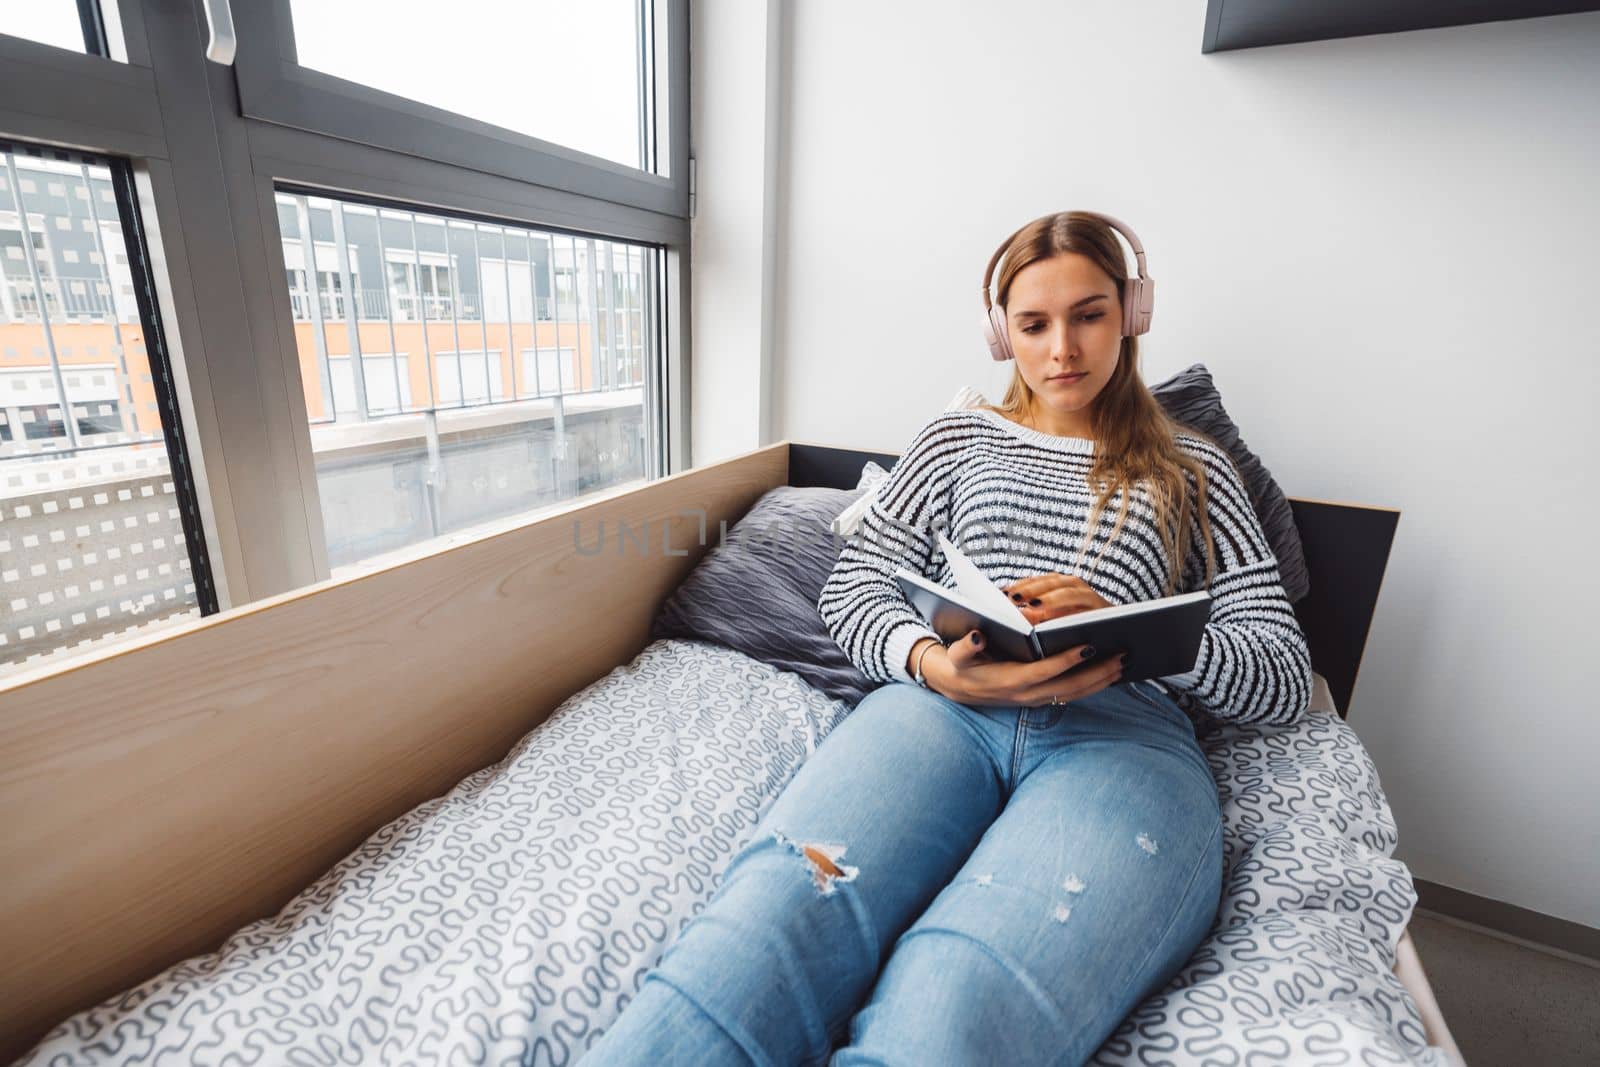 Blonde young caucasian woman lying on her dorm room bed next to a window putting on headphones, listening to music on a cold cloudy autumn day.